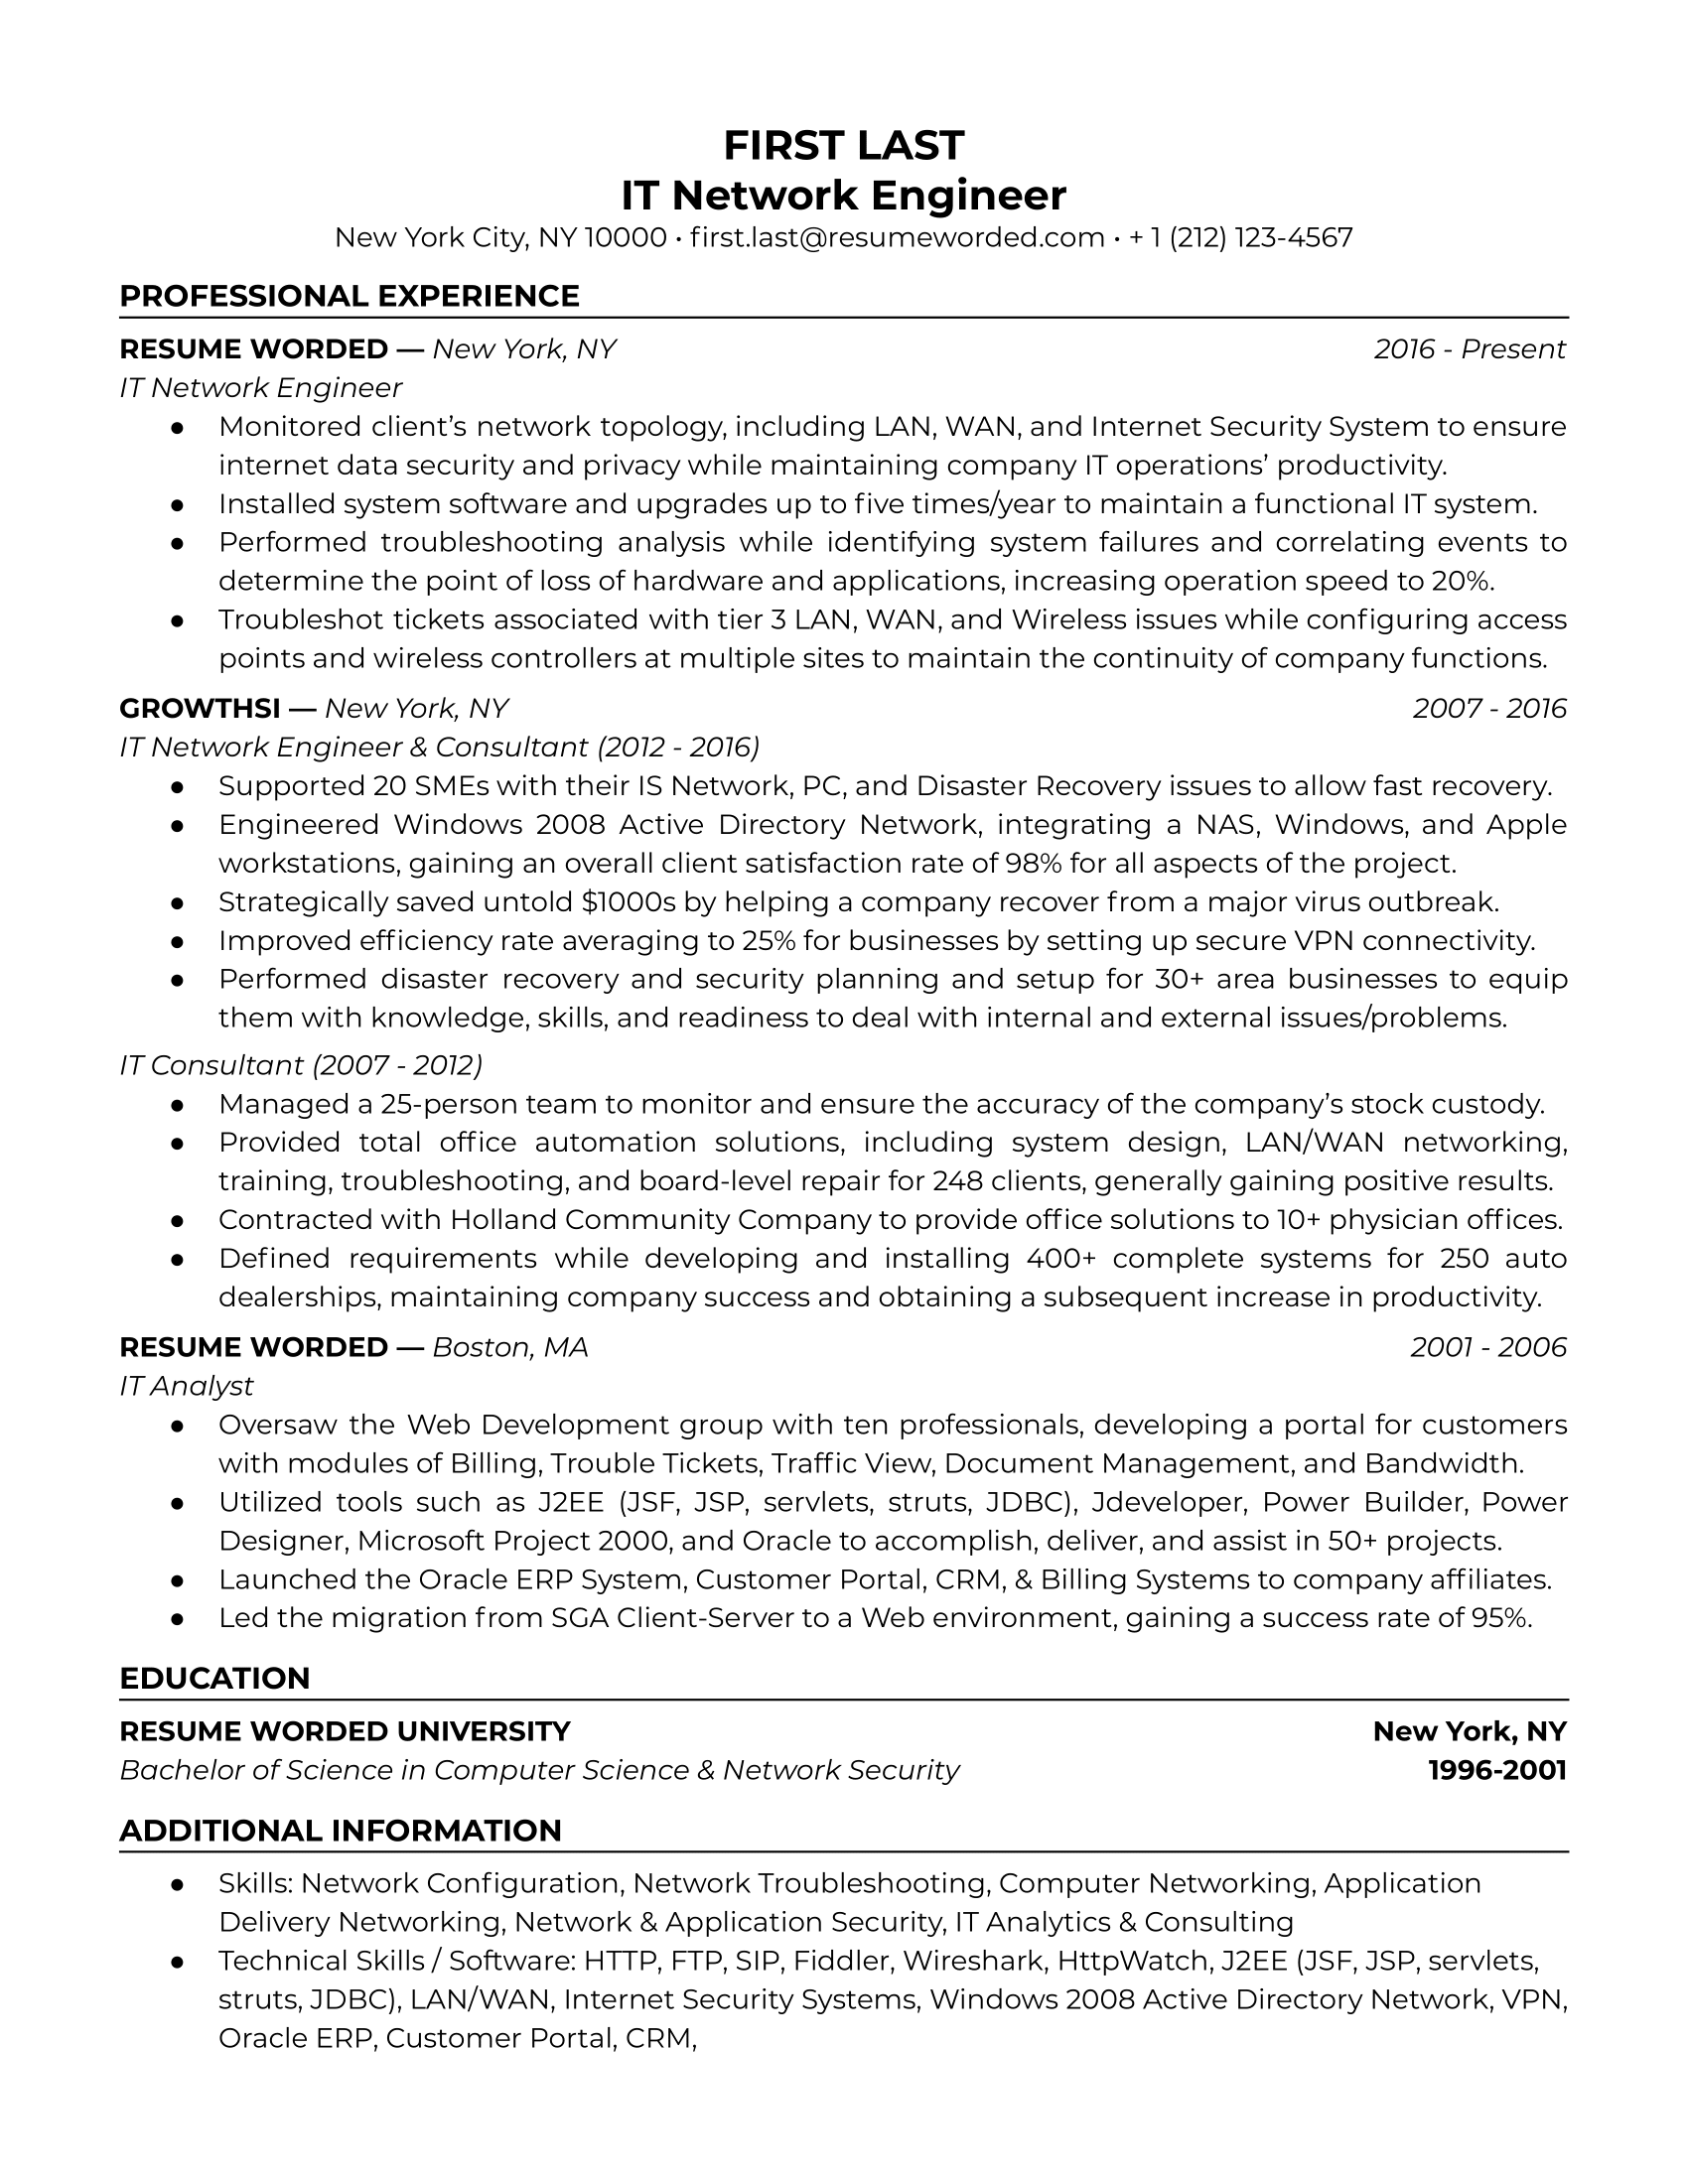 IT network engineer resume with strong action verbs and measurable achievements